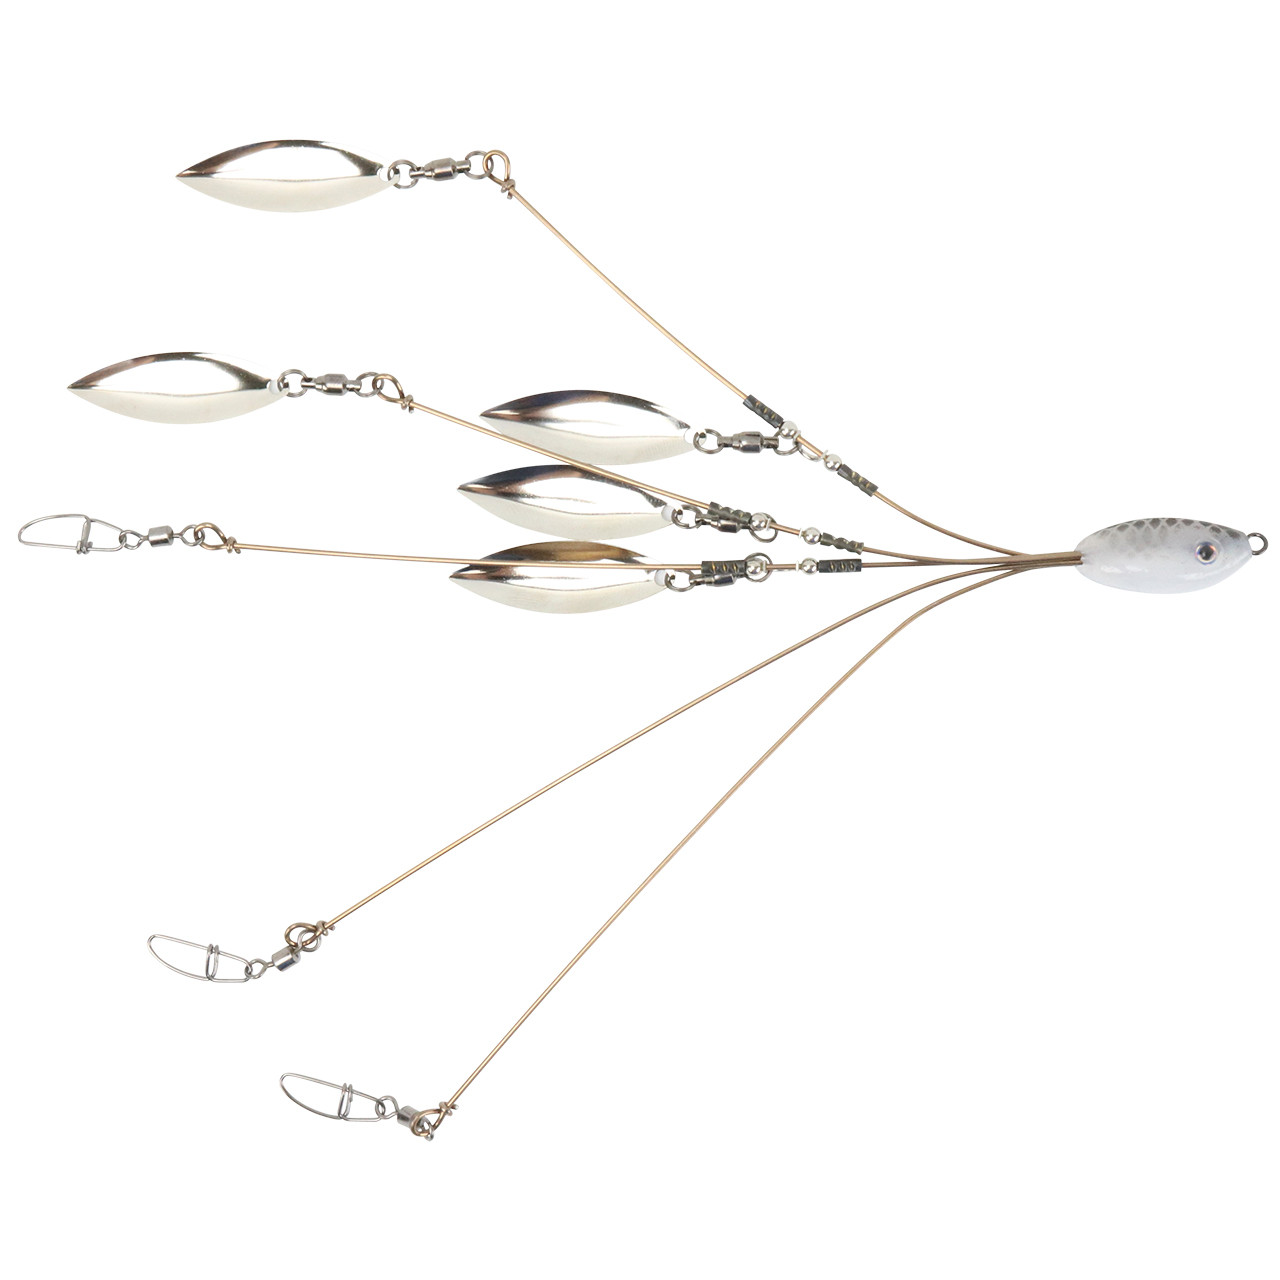 5 Arms Alabama Rig Fishing Lure, Umbrella Rig with Spinner for